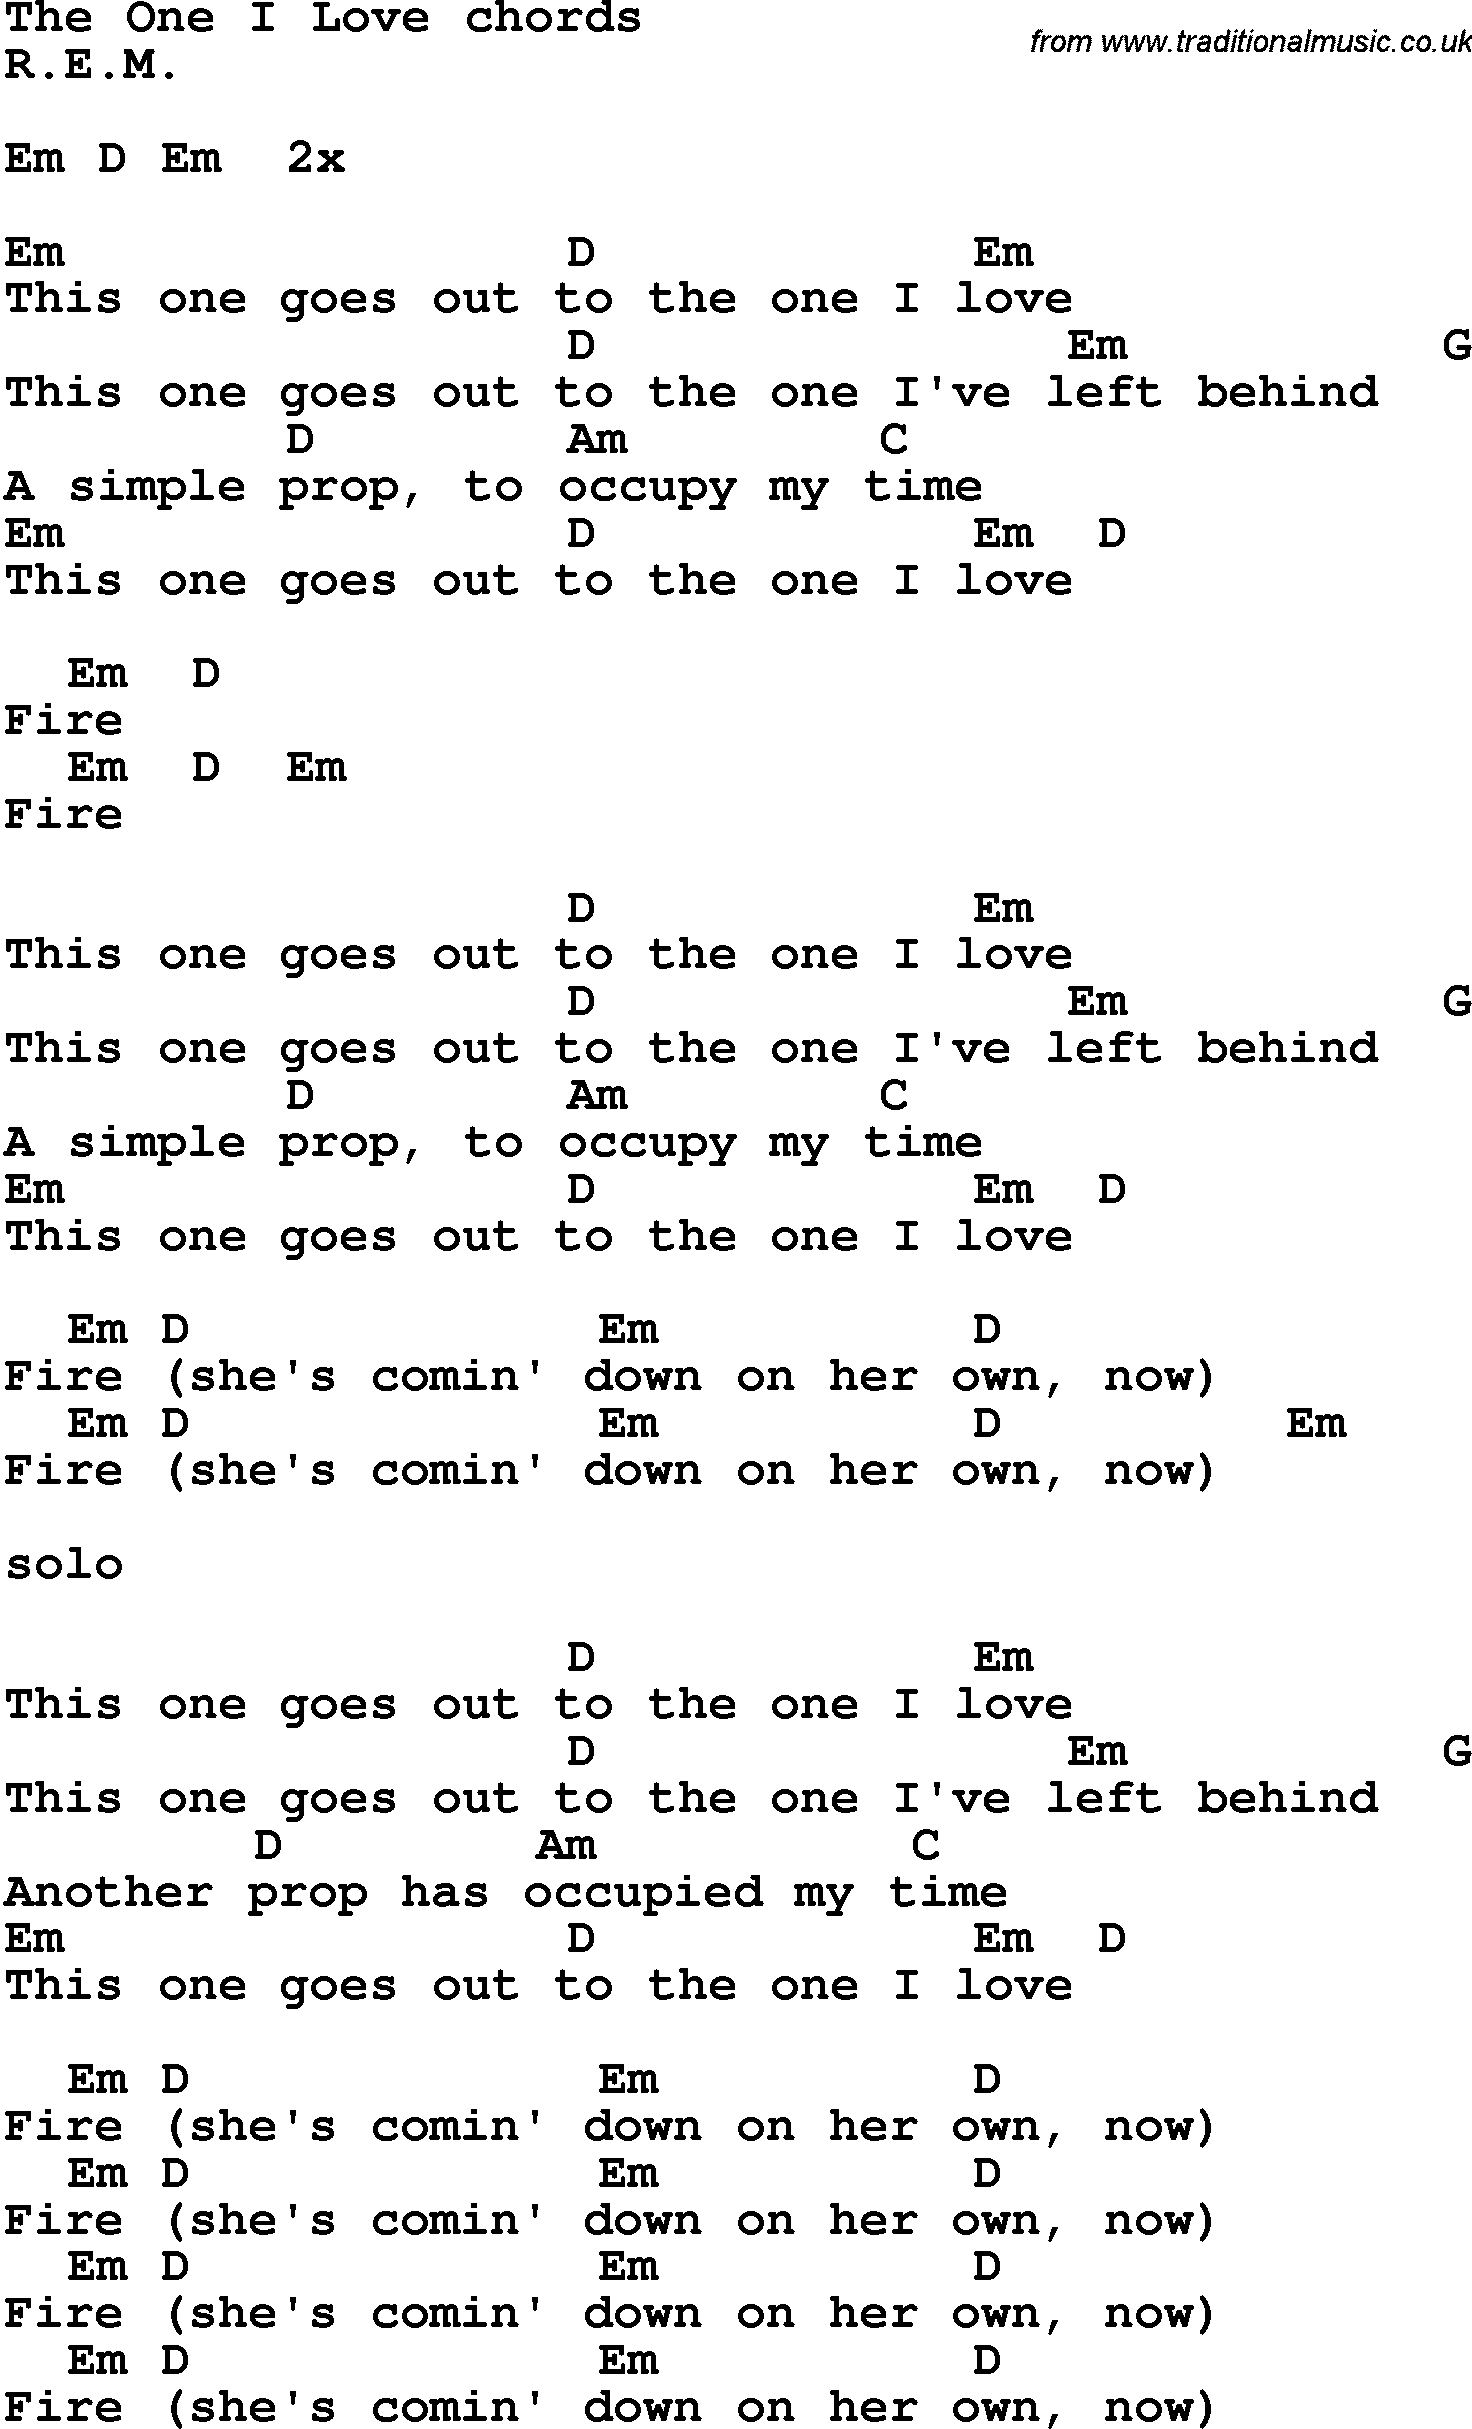 Song Lyrics with guitar chords for The One I Love - Rem